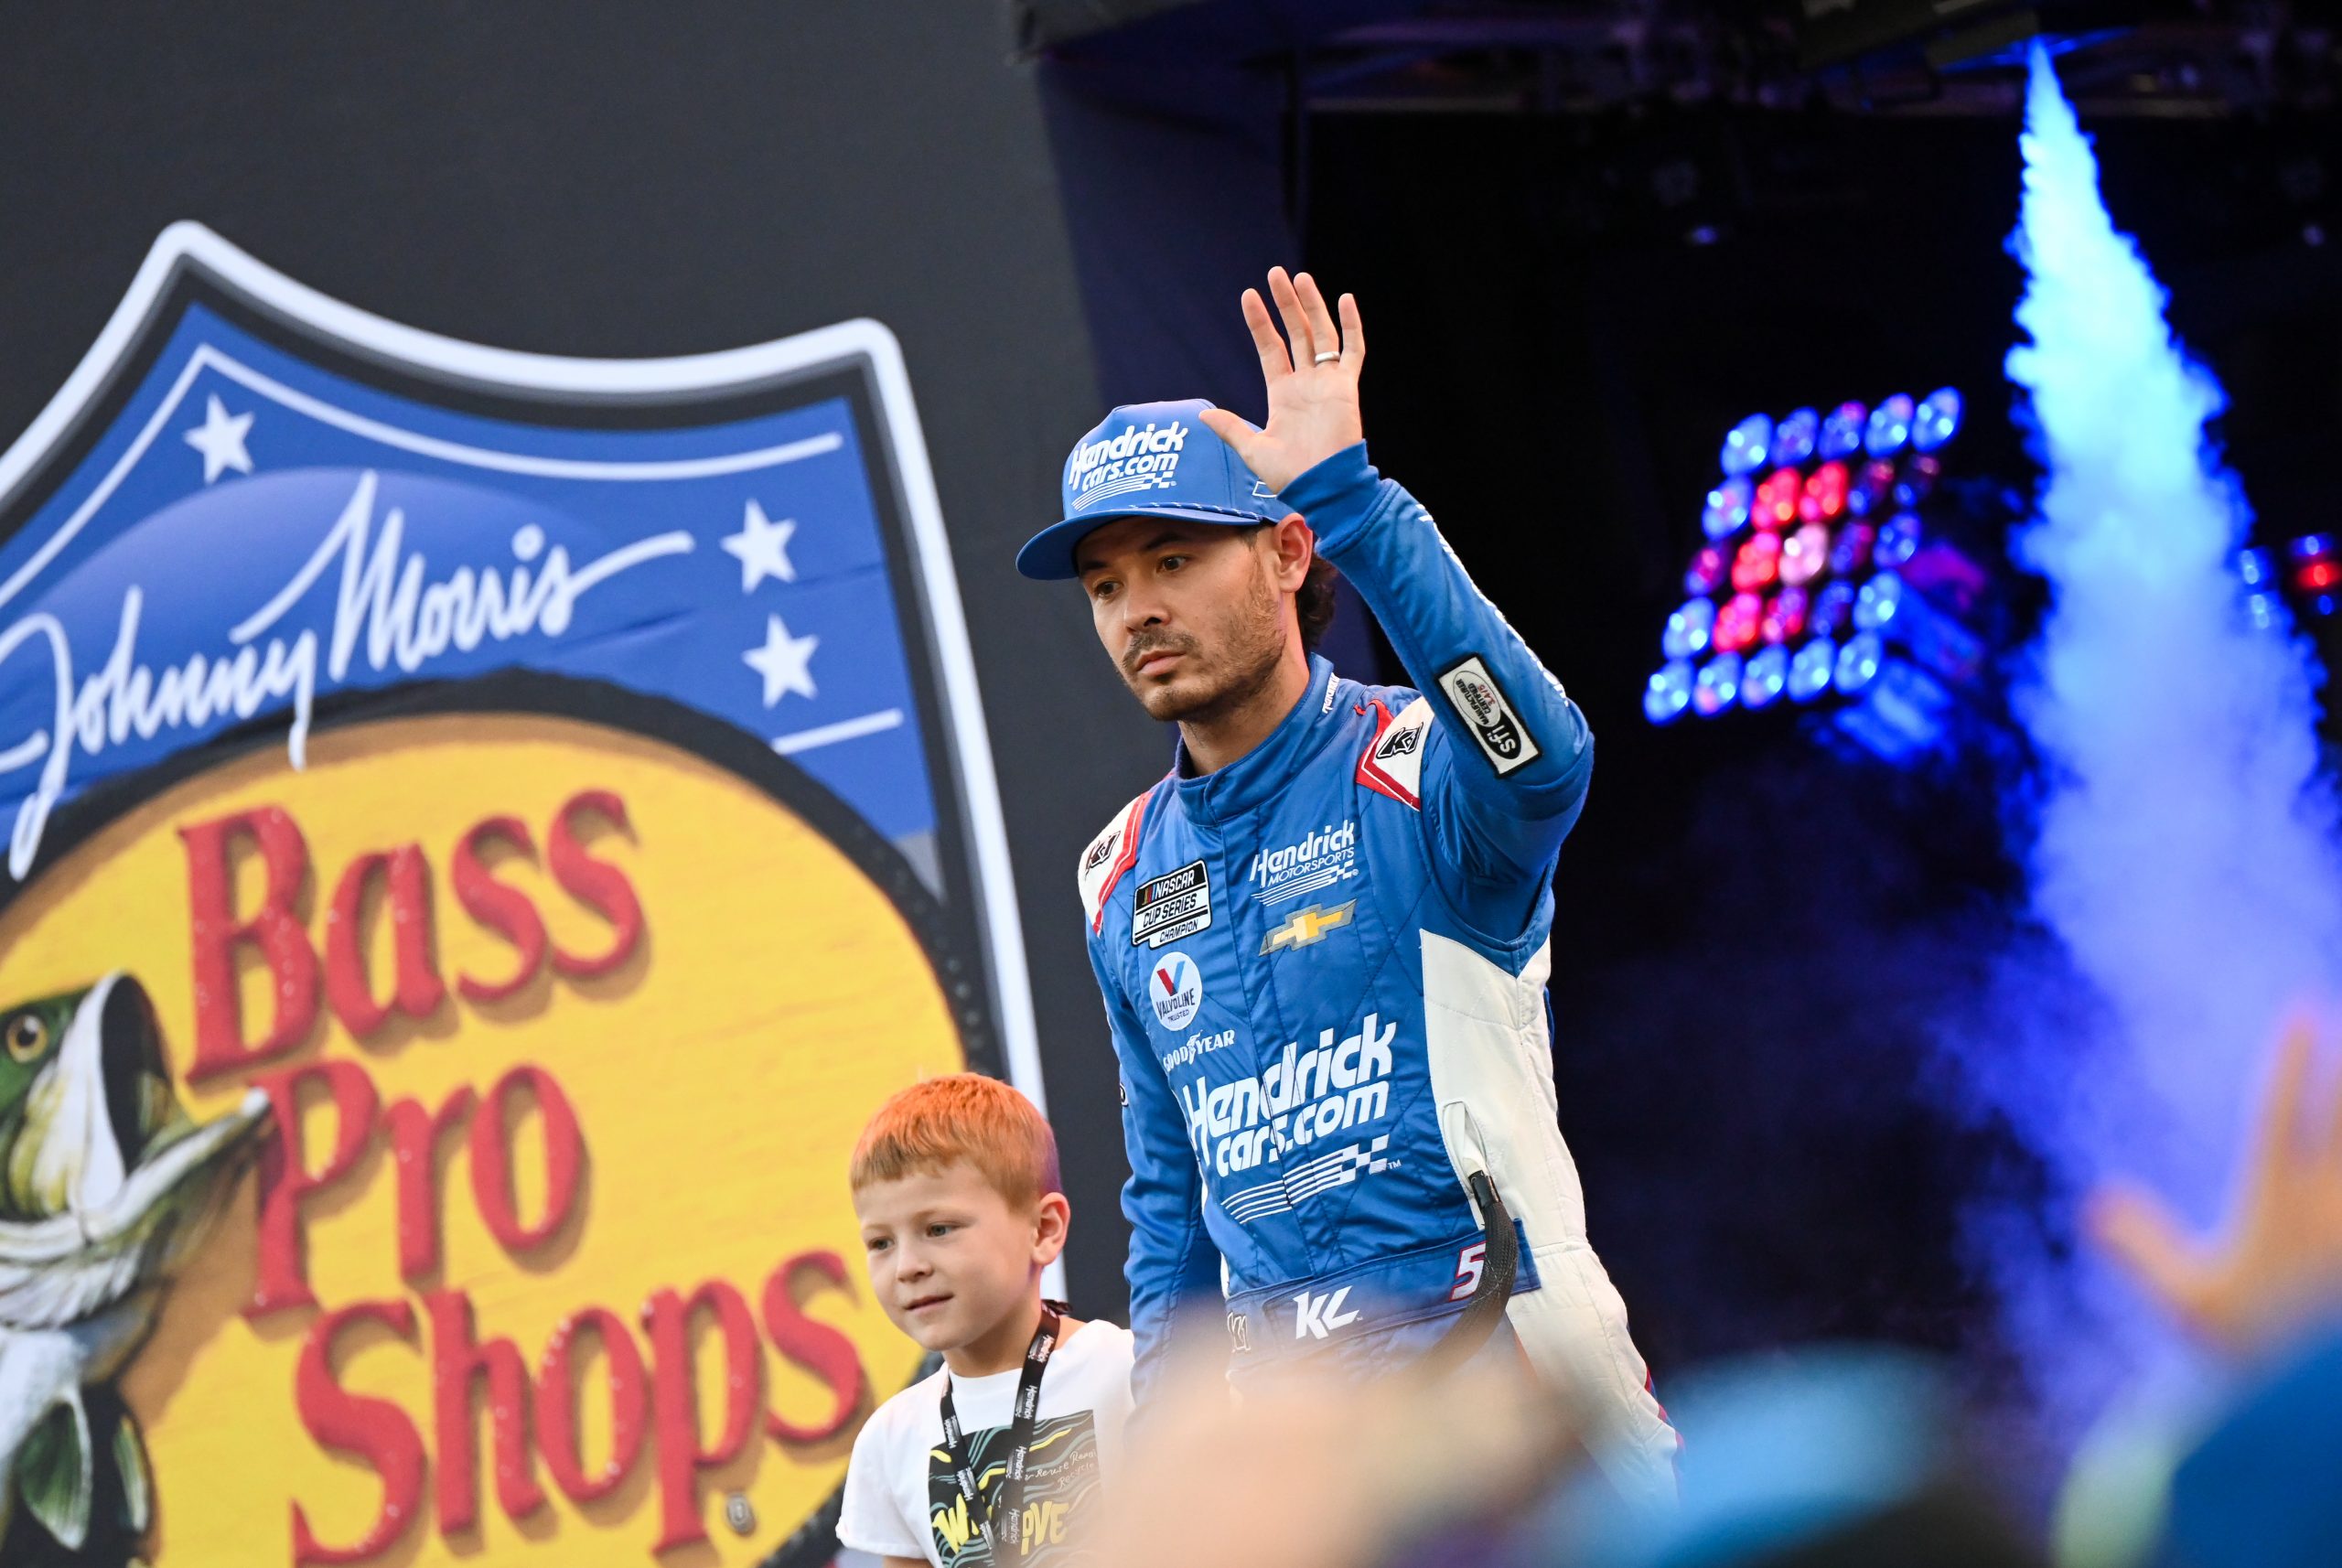 Kyle Larson and son Owen acknowledge the fans at Bristol Motor Speedway. (Photo: Kevin Ritchie | The Podium Finish)